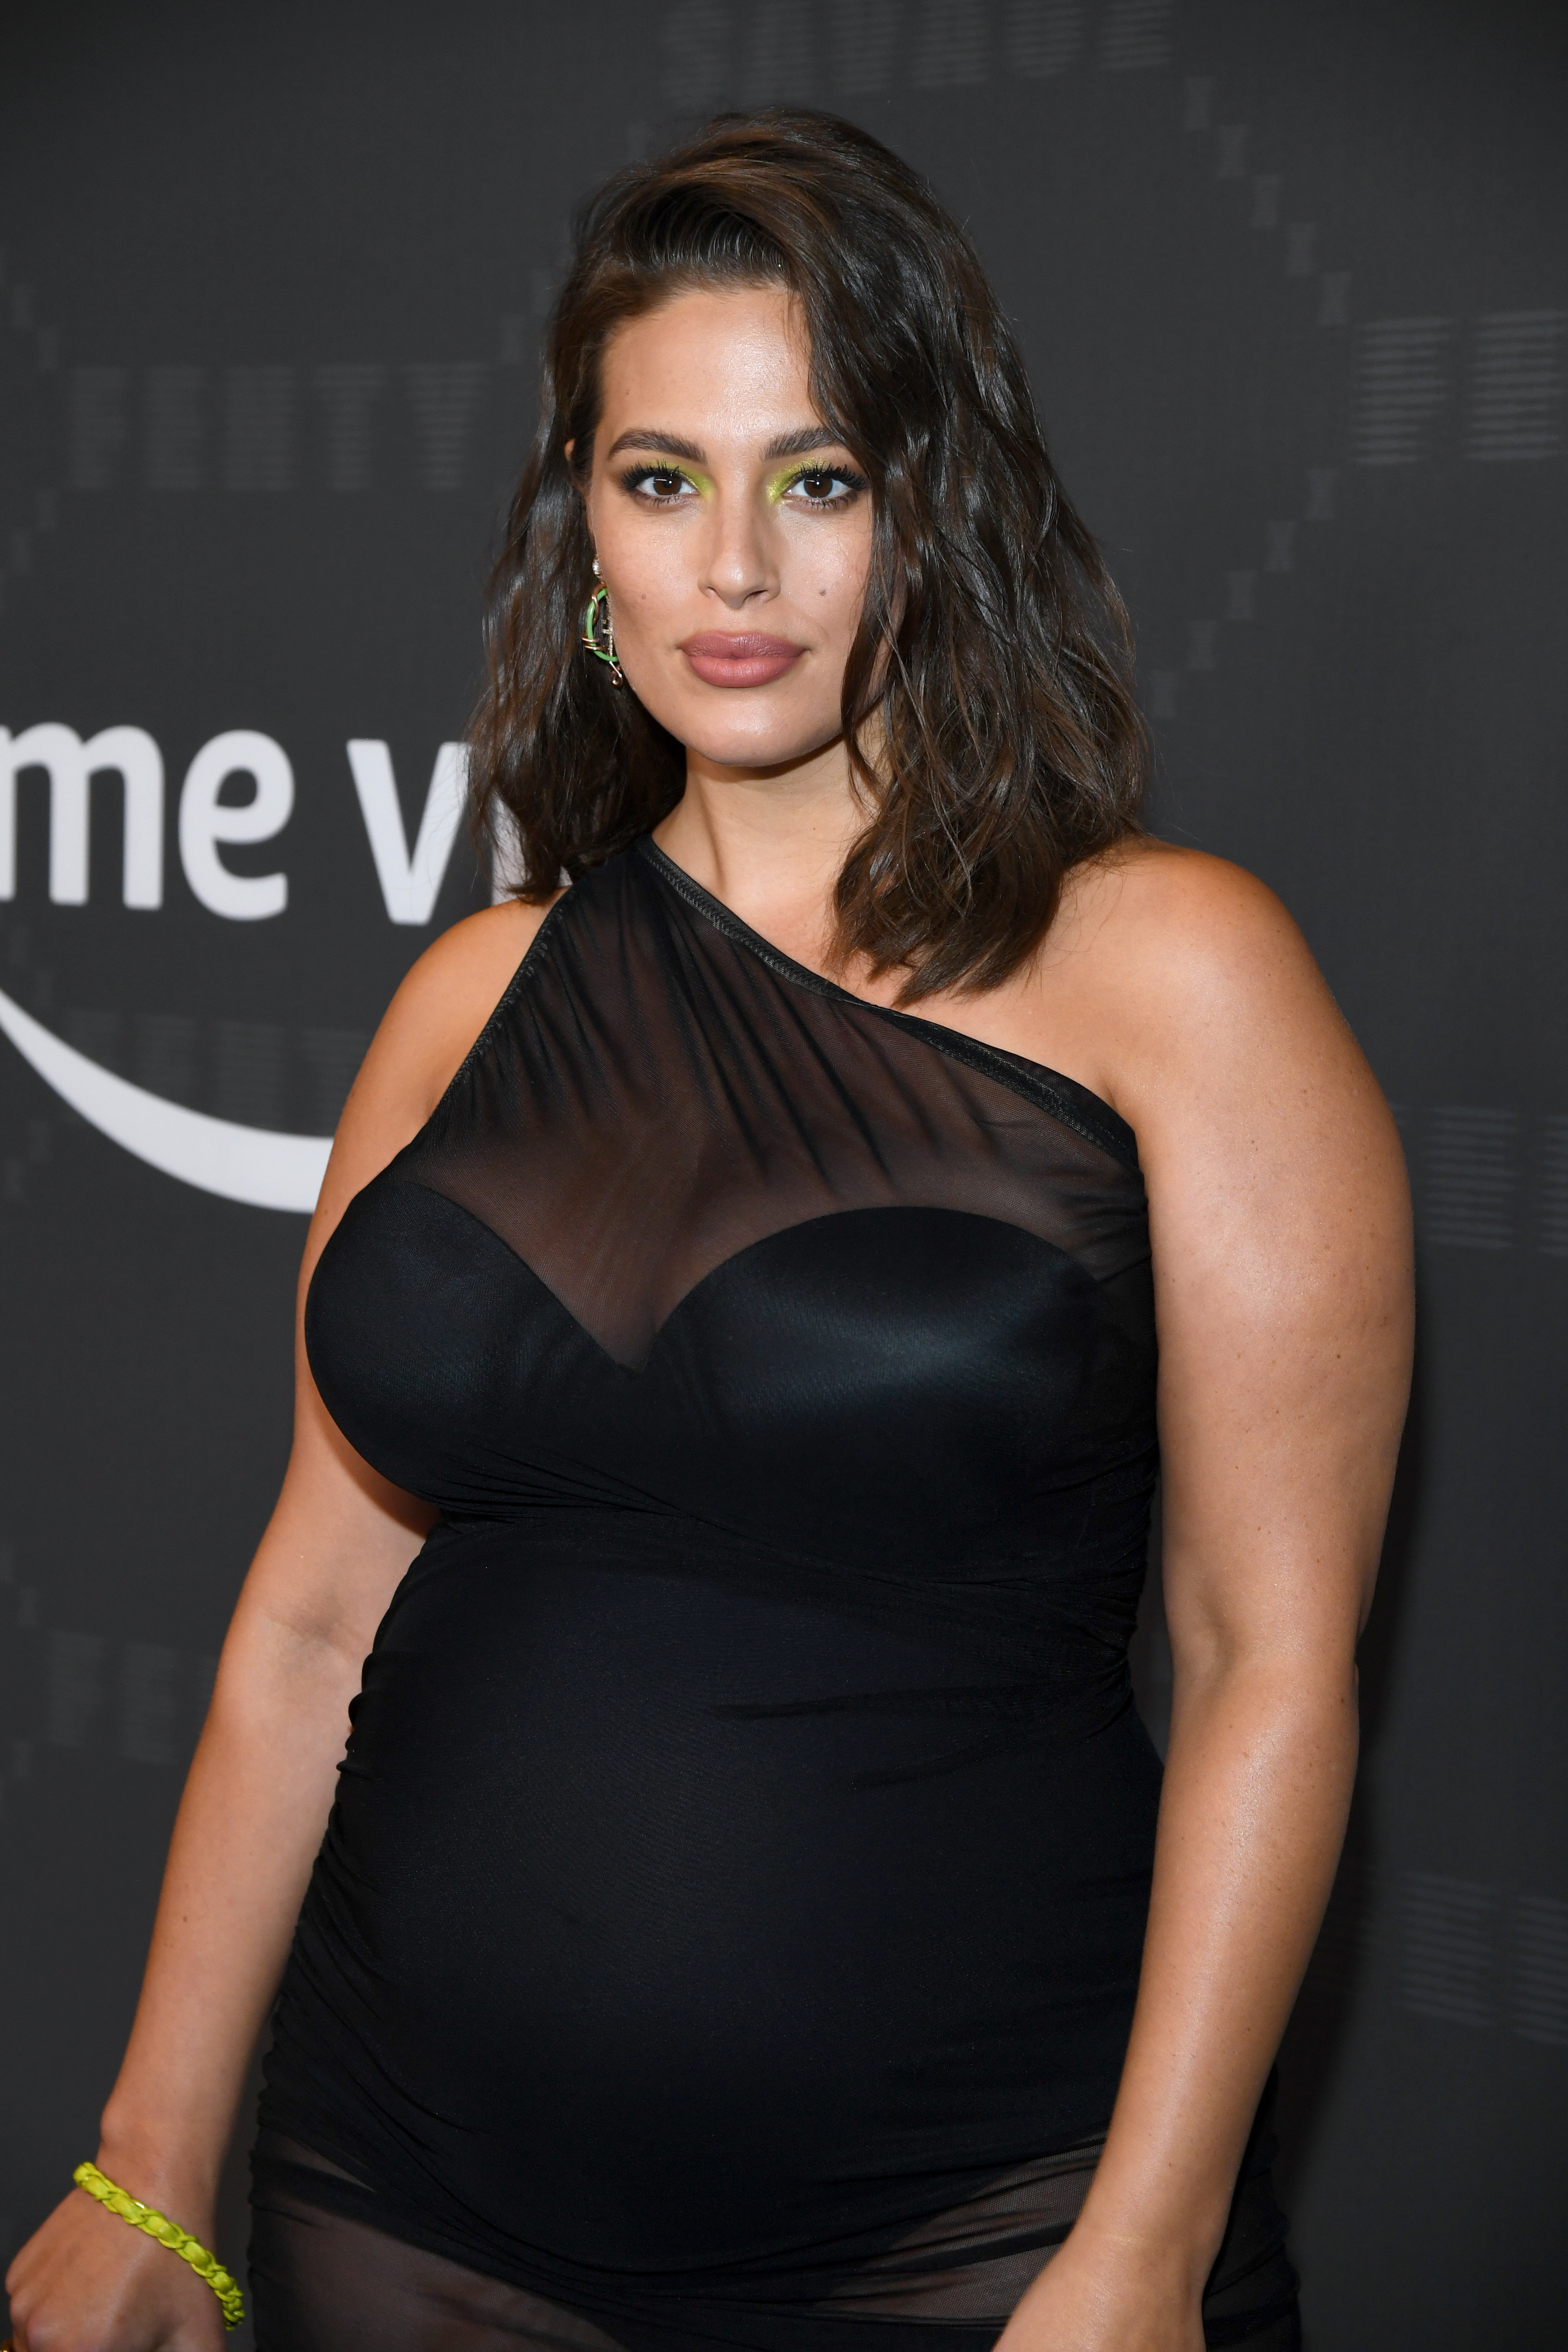 Ashley Graham attends Savage X Fenty Show Presented By Amazon Prime Video - Arrivals at Barclays Center on September 10, 2019 in Brooklyn, New York